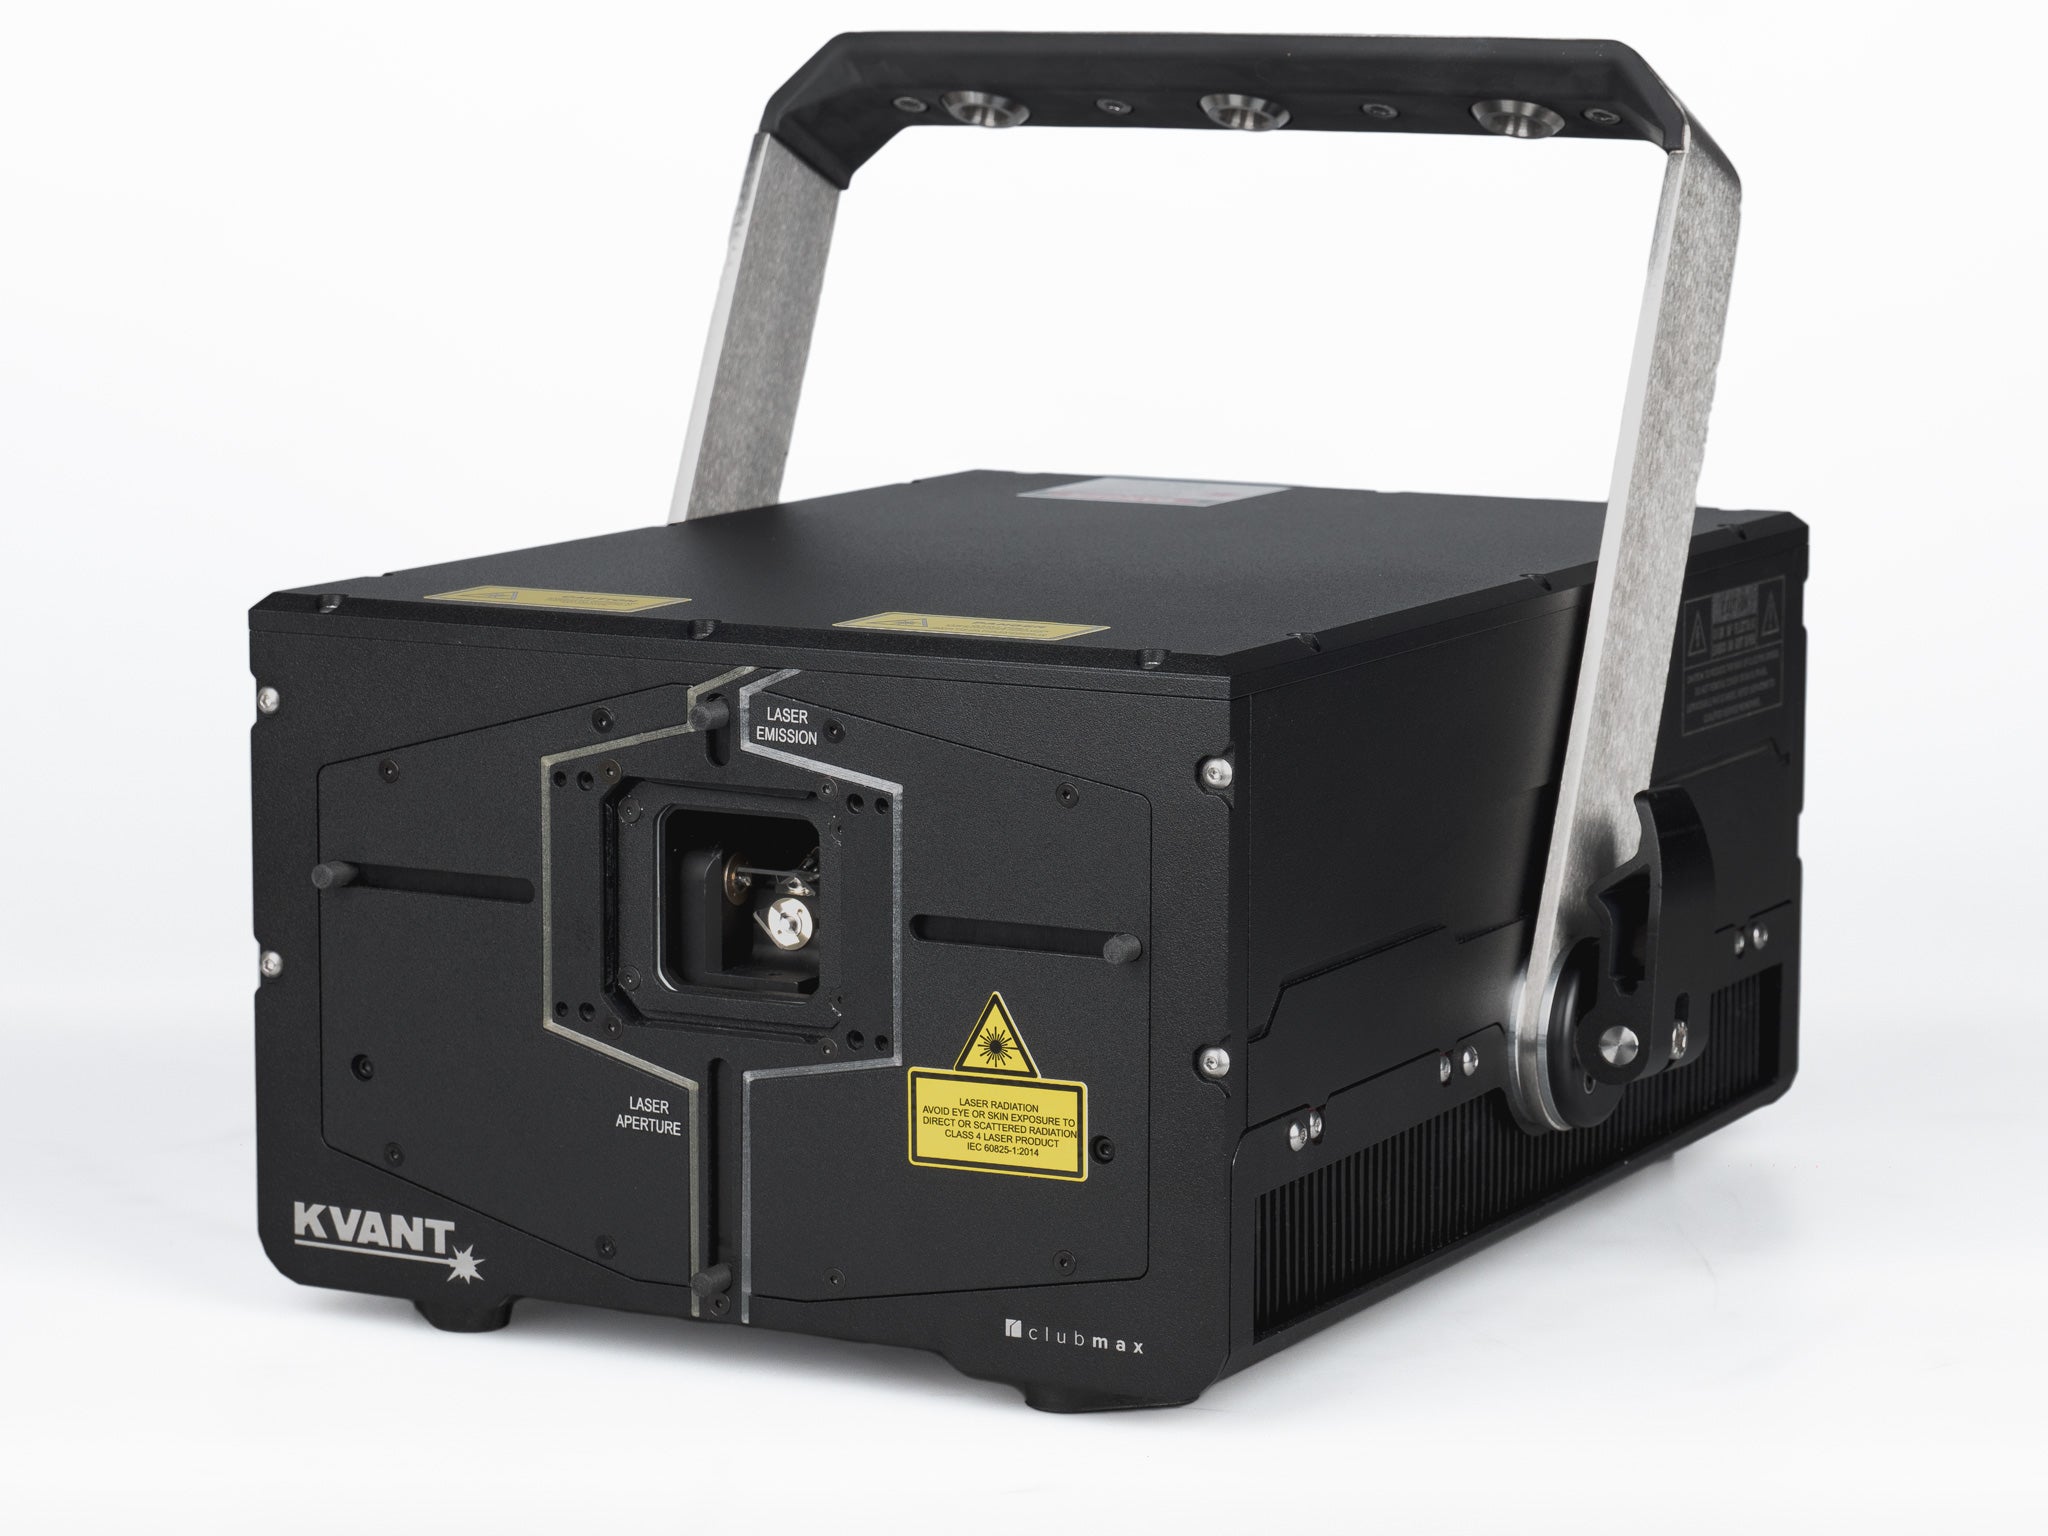 KVANT Clubmax 18 FB4 IP65 waterproof professional laser projector for outdoor shows_2